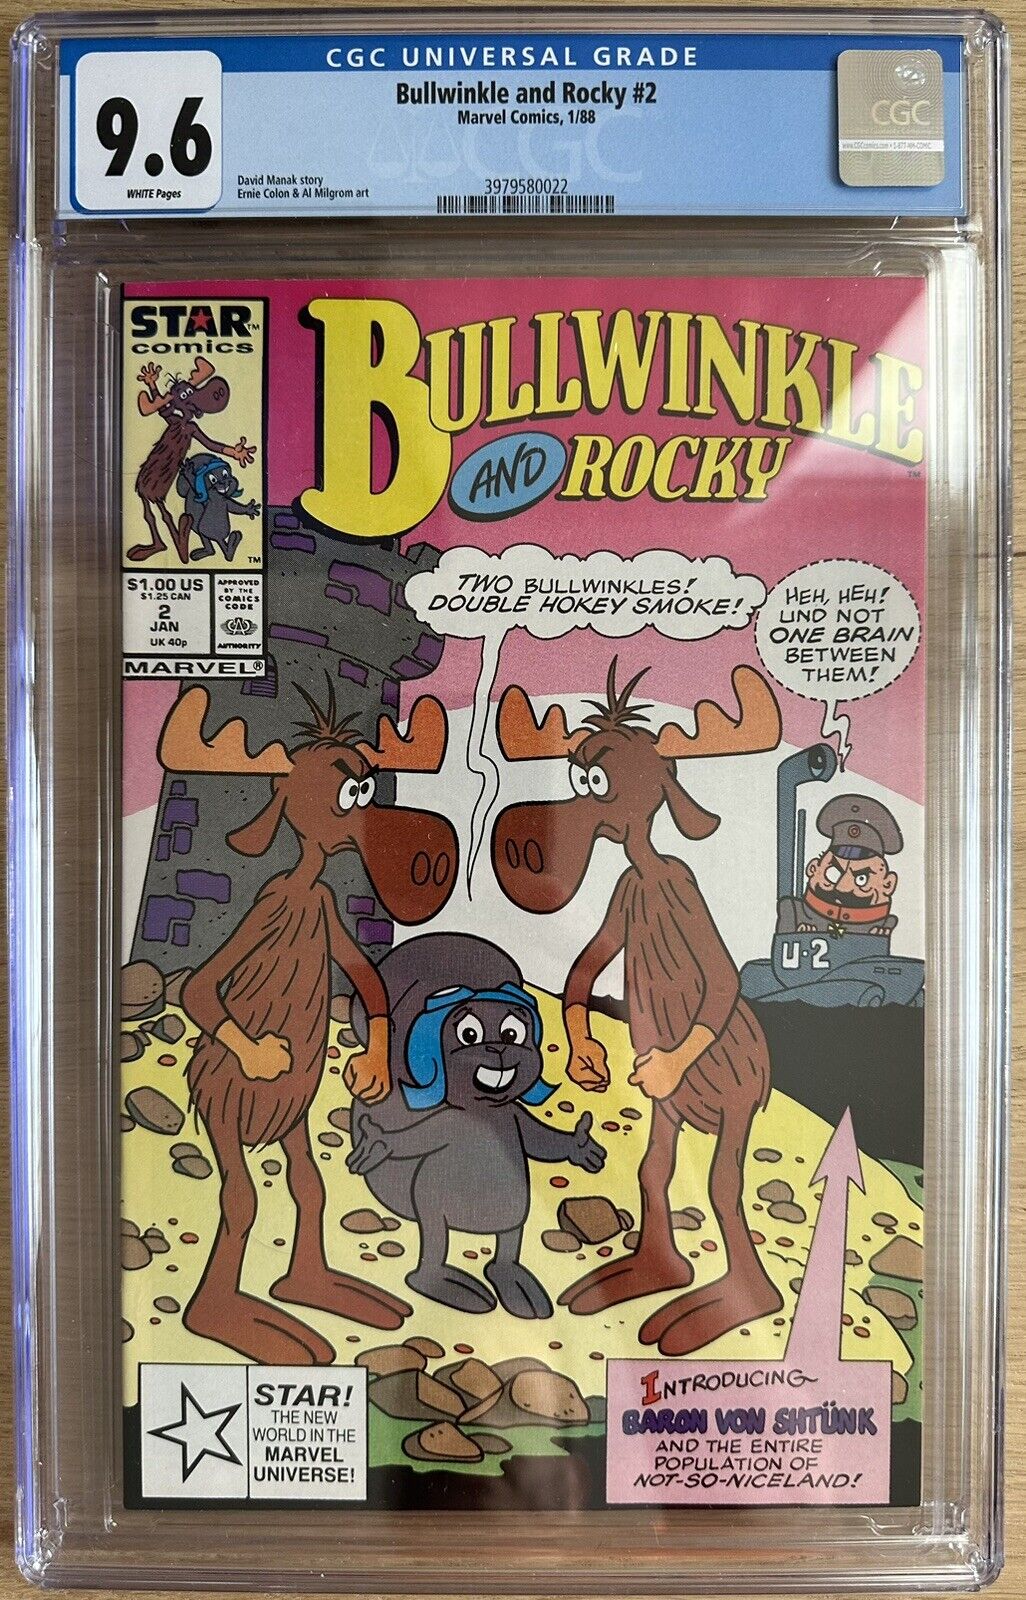 Bullwinkle and Rocky #2 1988 CGC 9.6